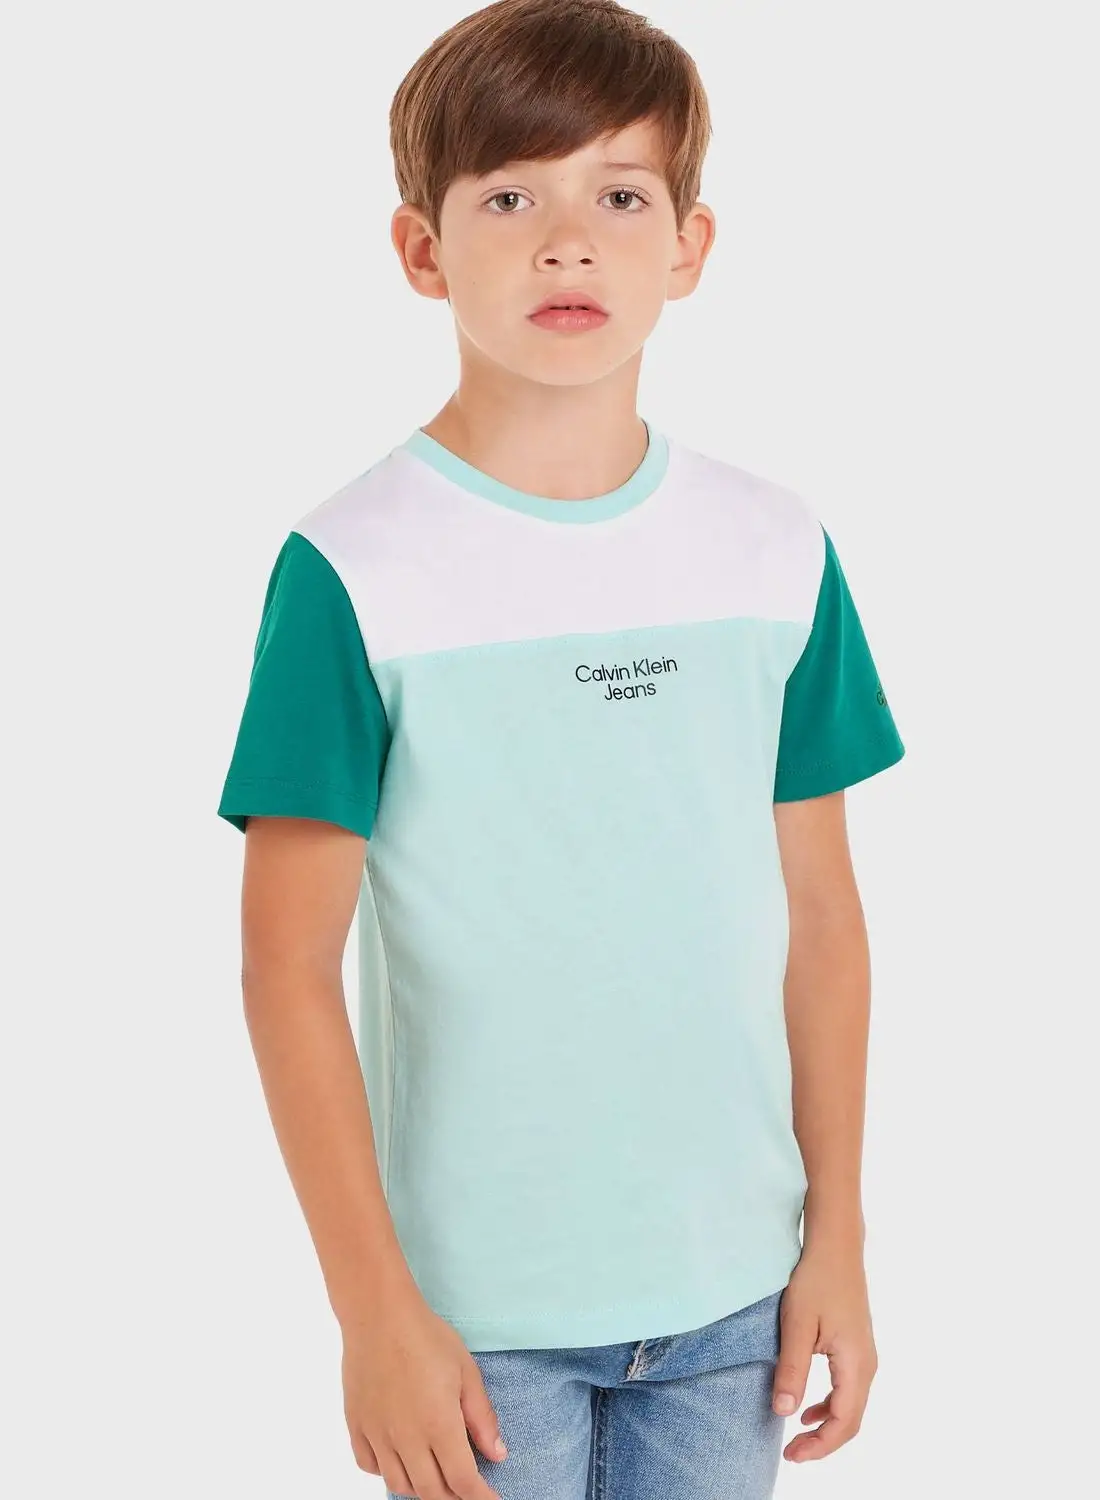 Calvin Klein Jeans Youth Color Block T-Shirt